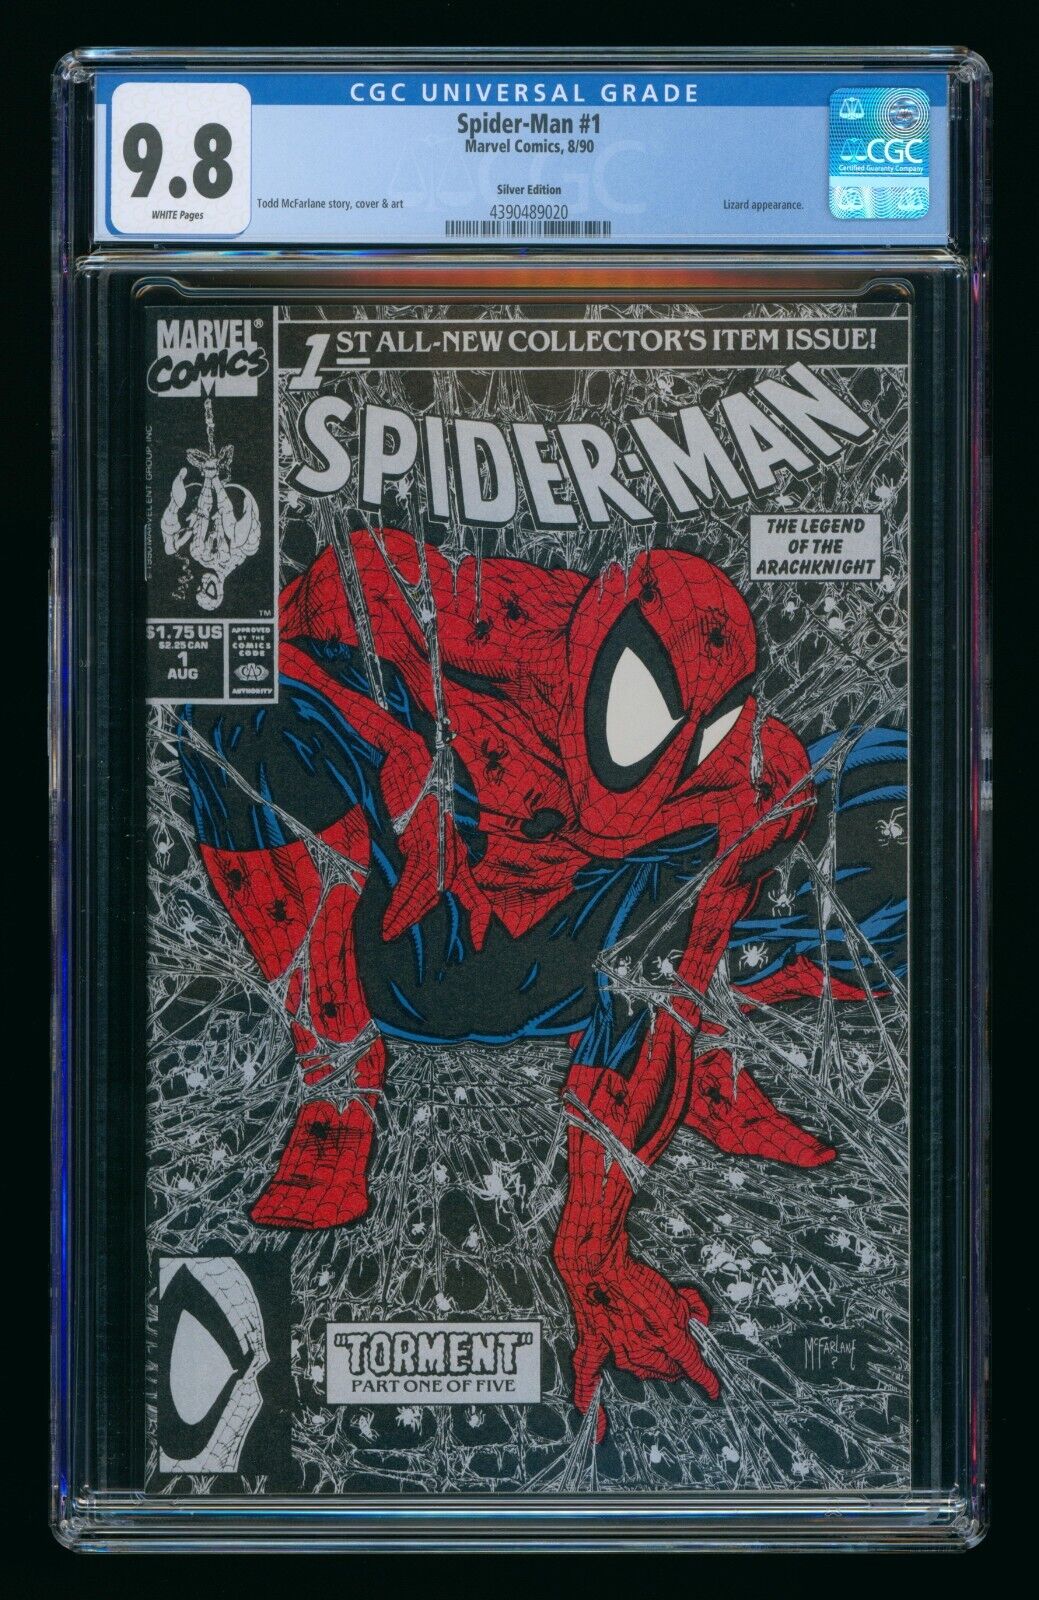 SPIDER-MAN #1 (1990) CGC 9.8 SILVER EDITION WHITE PAGES